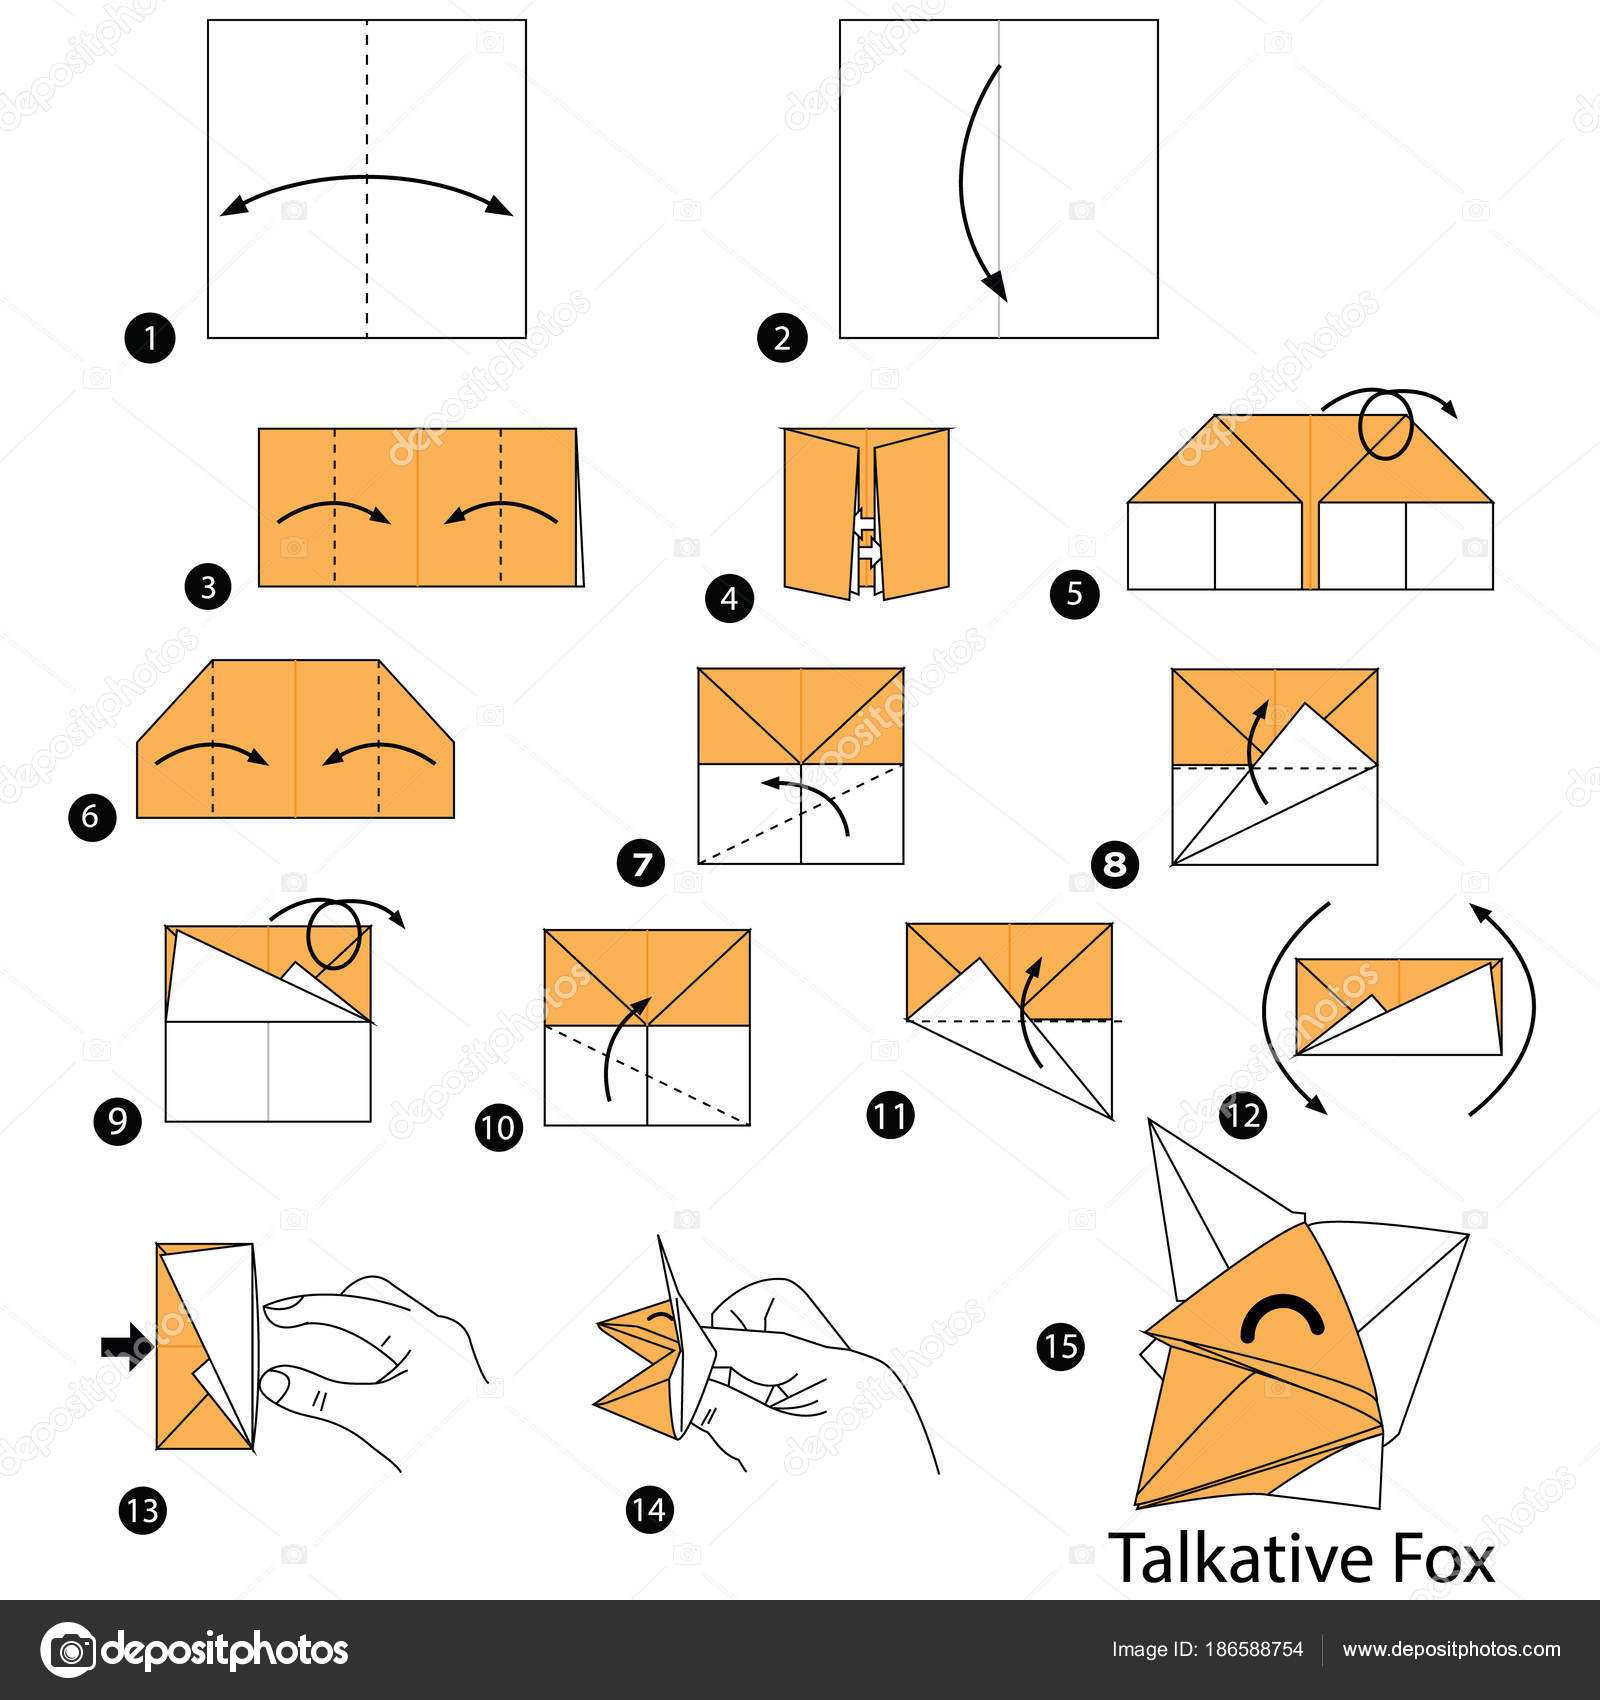 How To Make A Fox Origami Step Step Instructions How Make Origami Talkative Fox Stock Vector